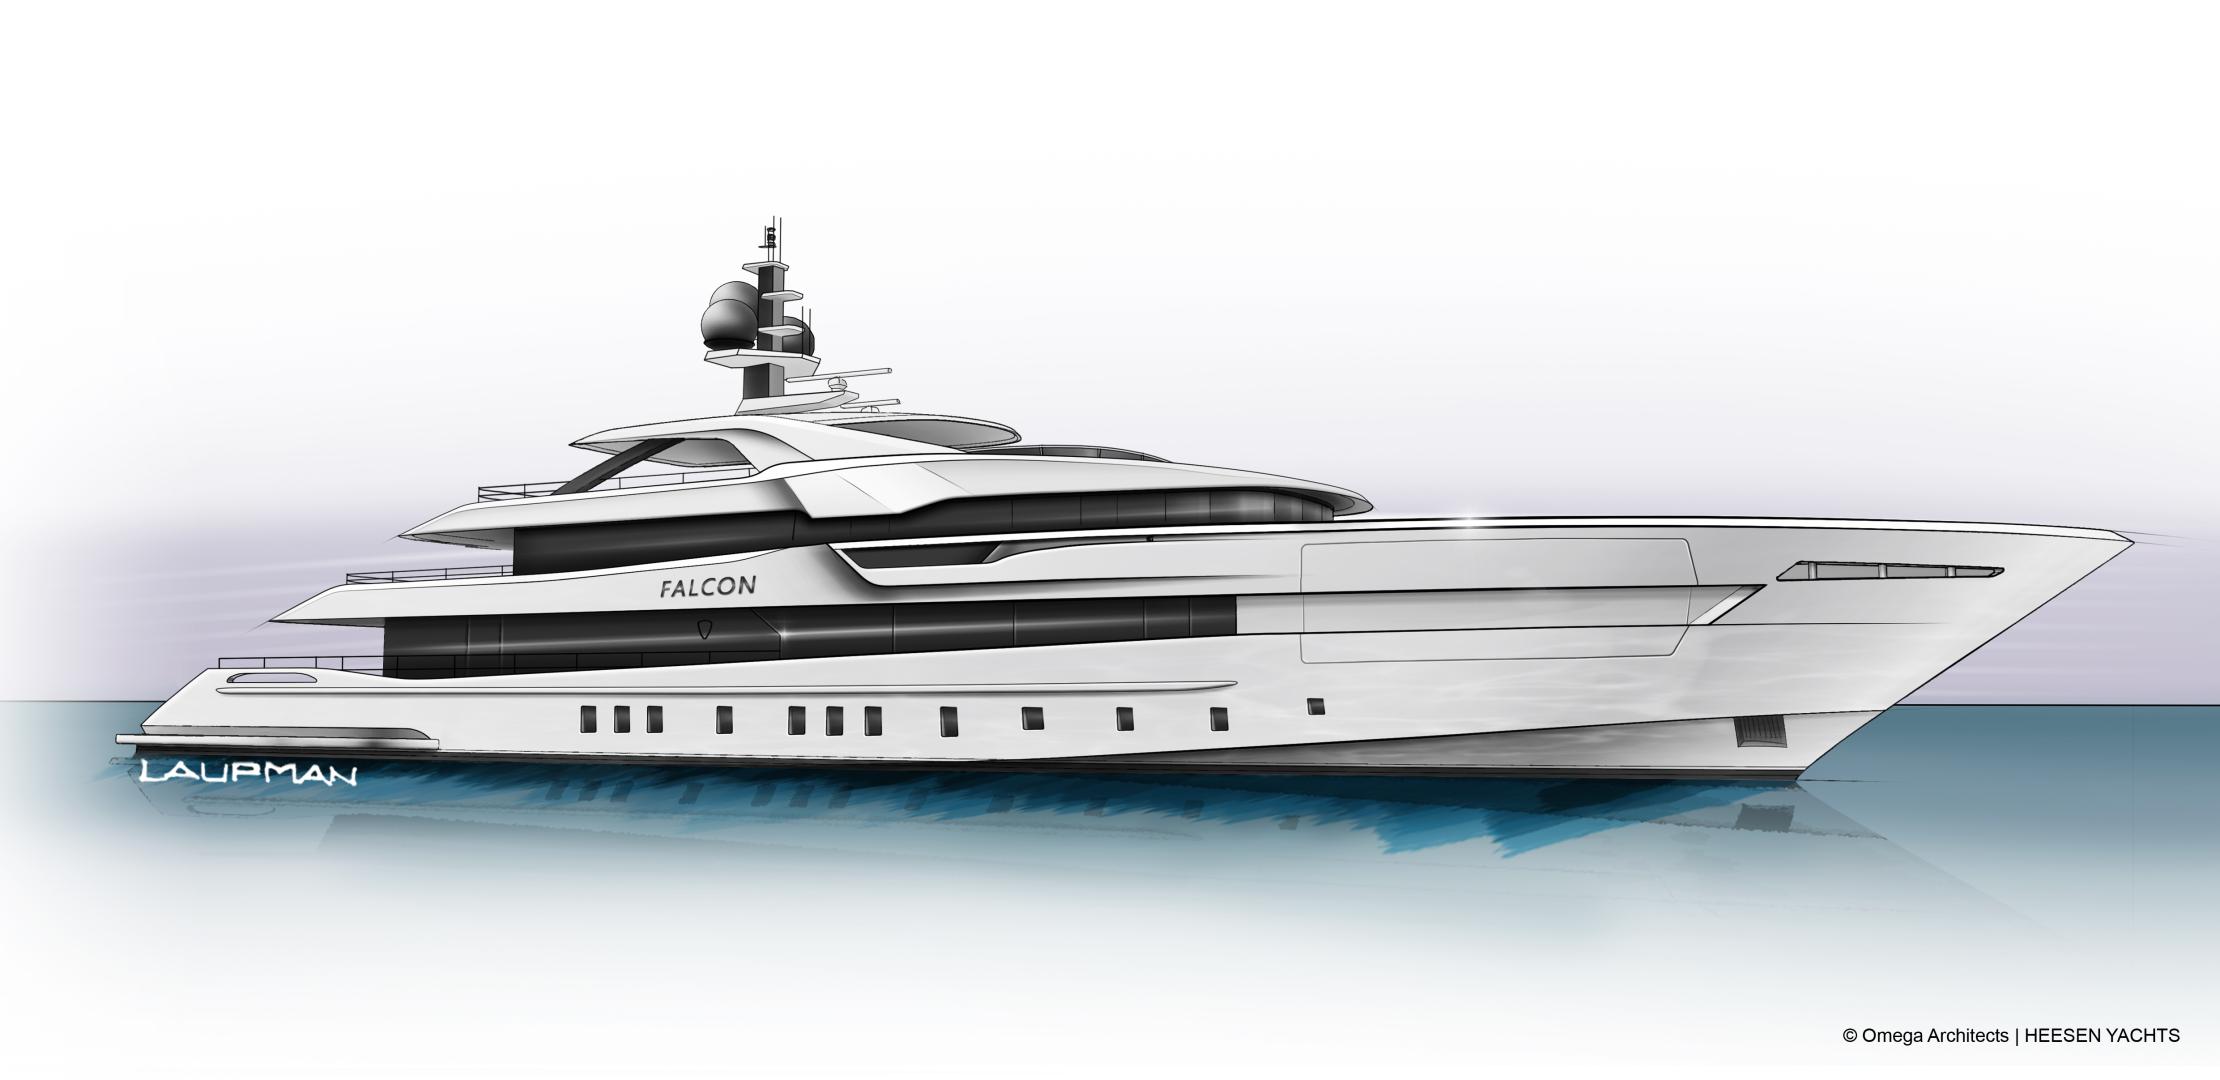 Heesen Yachts announced the sale of a new full custom 60m